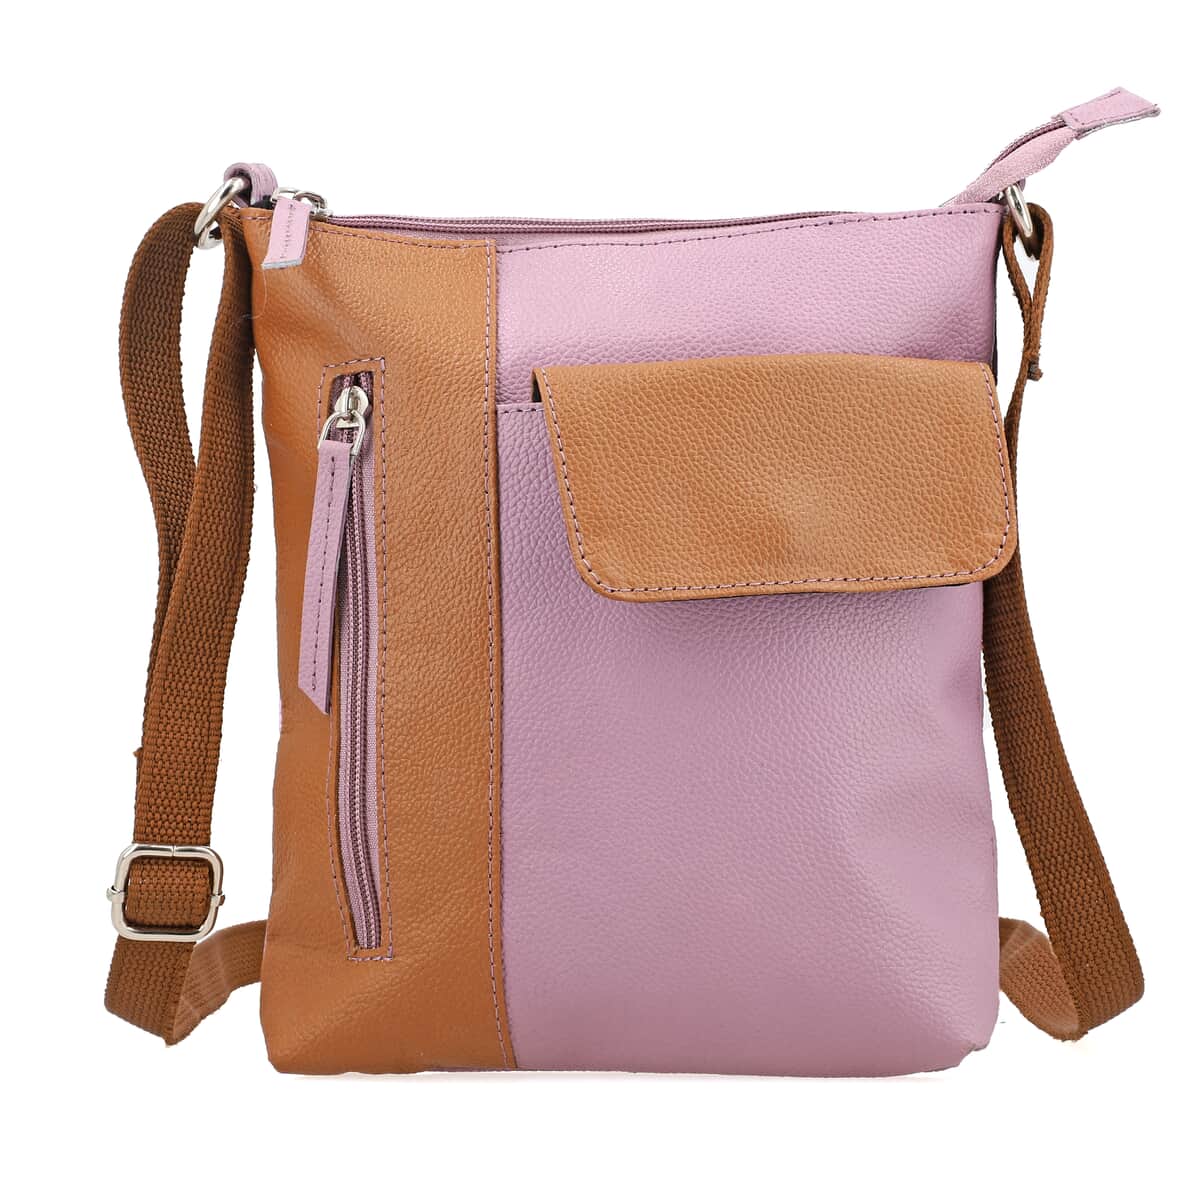 Mauve and Tan Genuine Leather Crossbody Bag with Multiple Pockets Adjustable Strap Zipper Closure, Leather Bag For Women image number 0